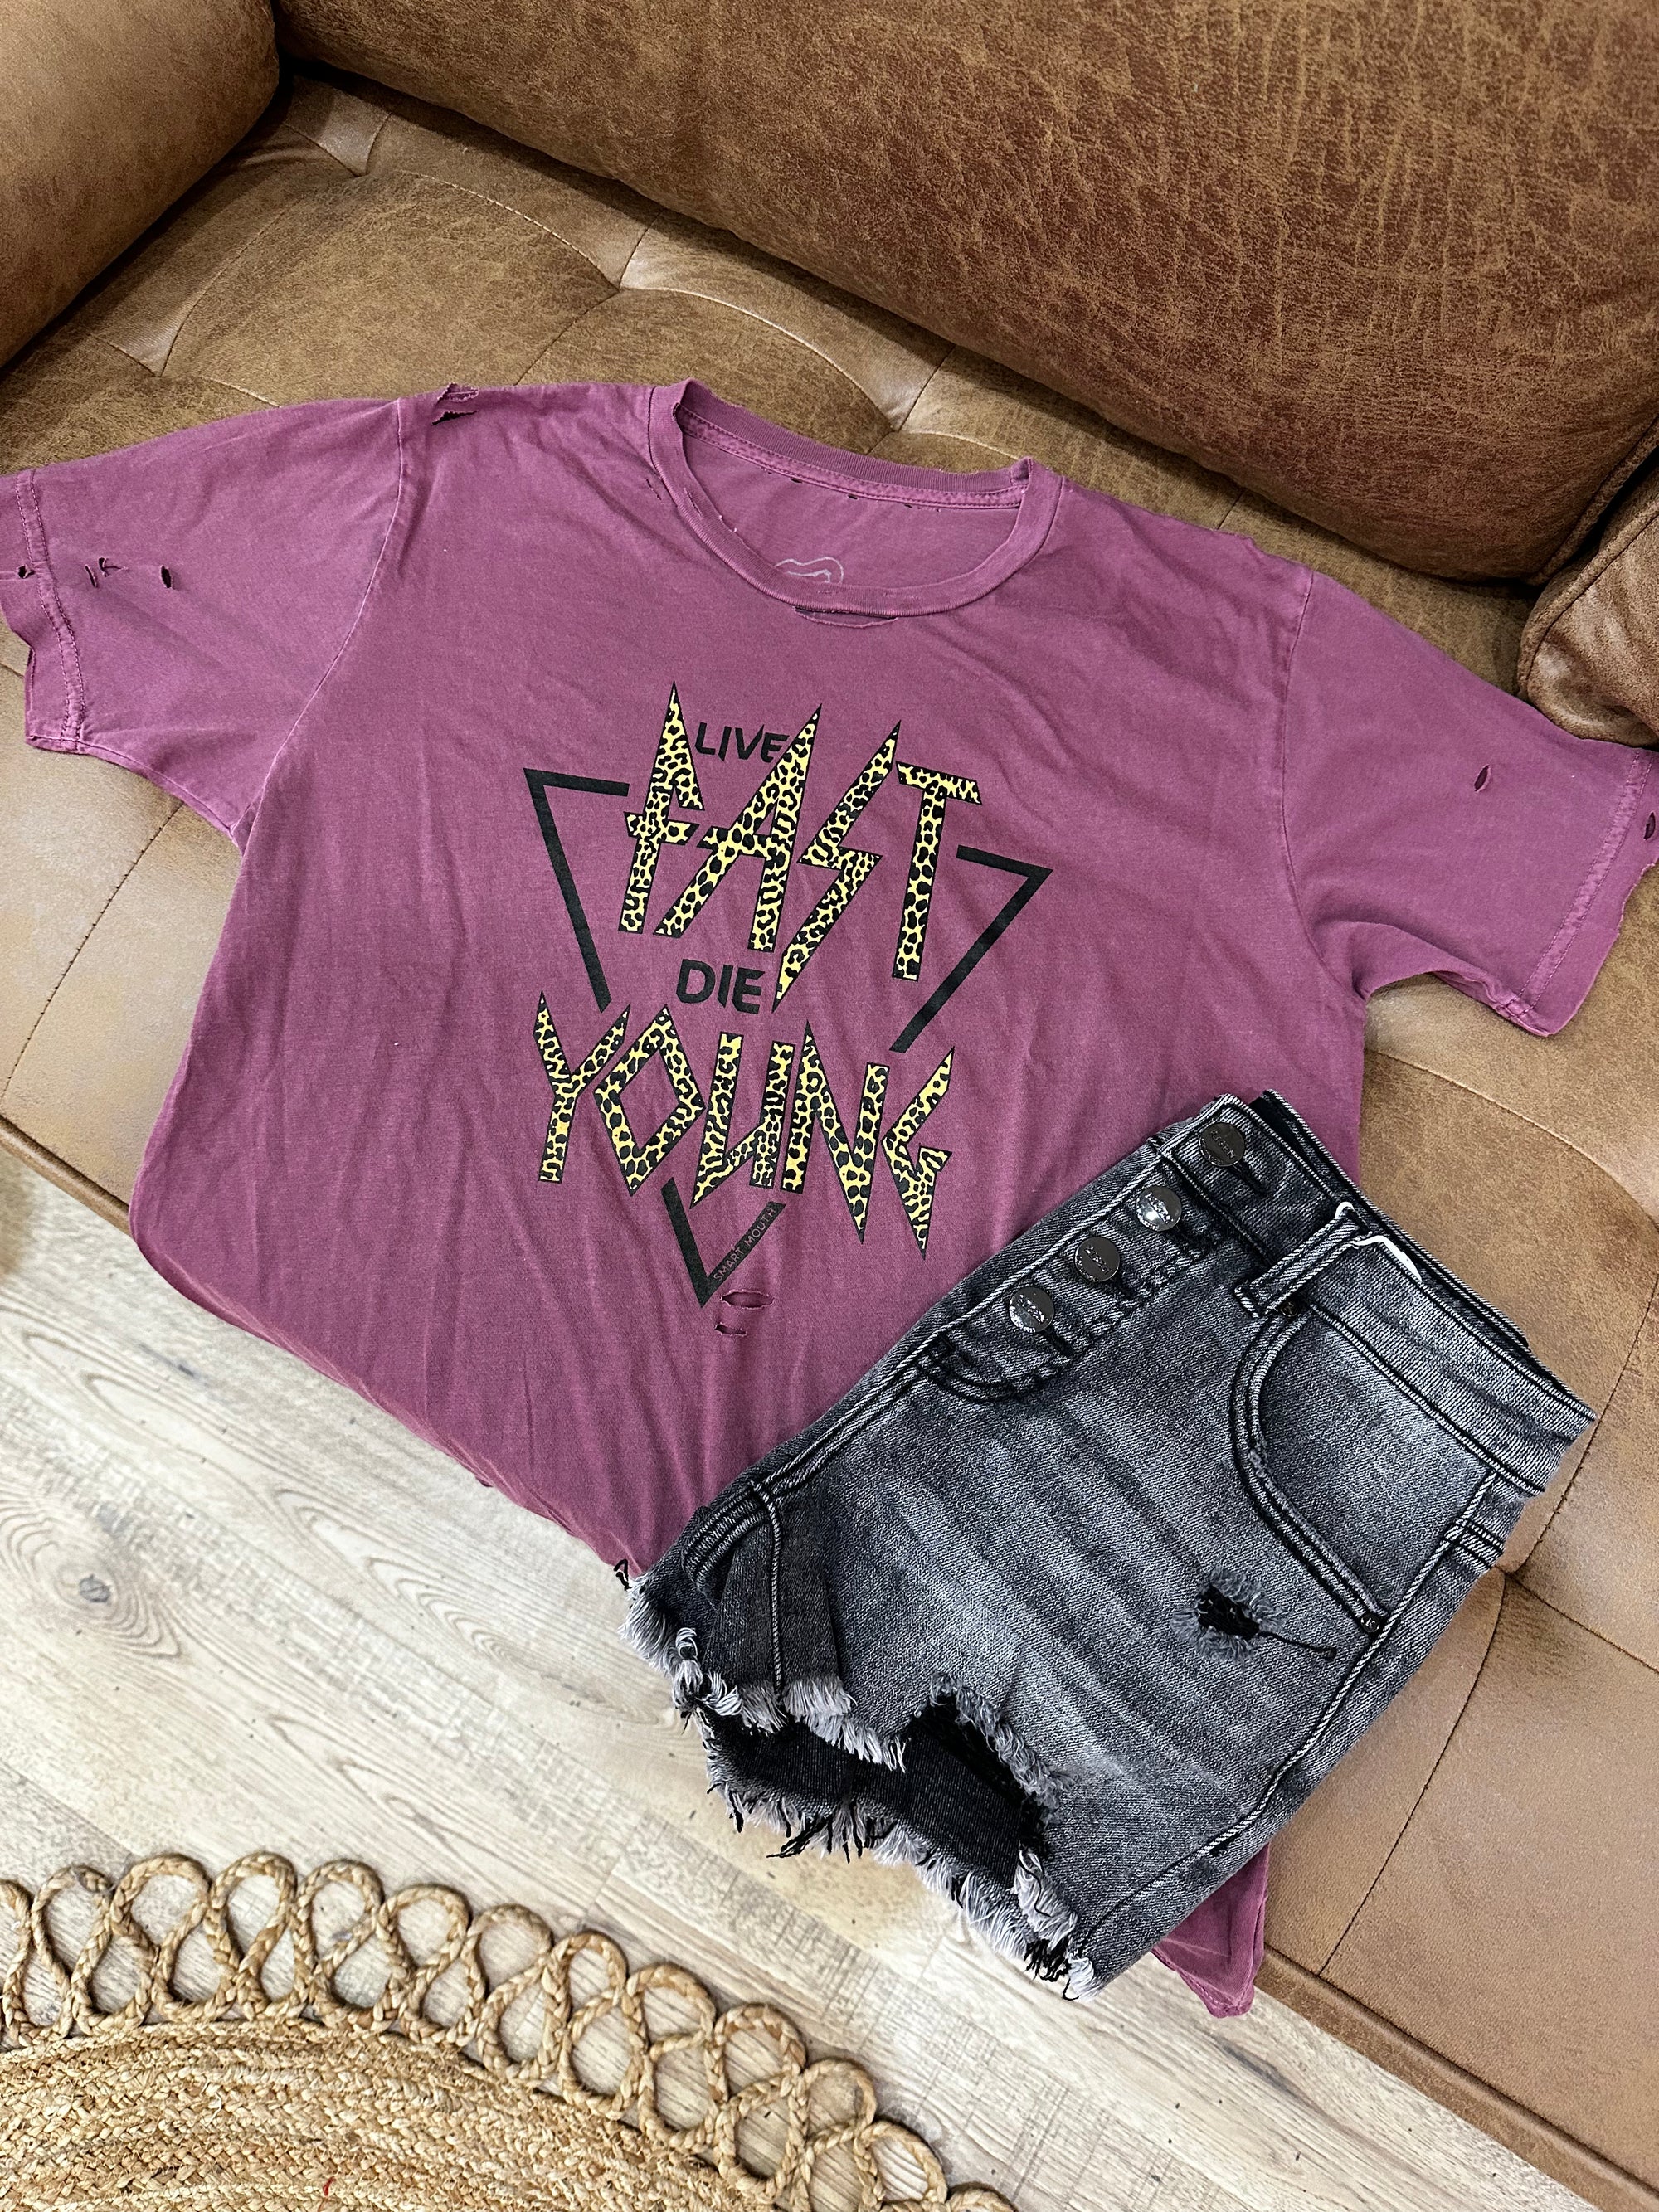 Live Fast Die Young Tattered Tee